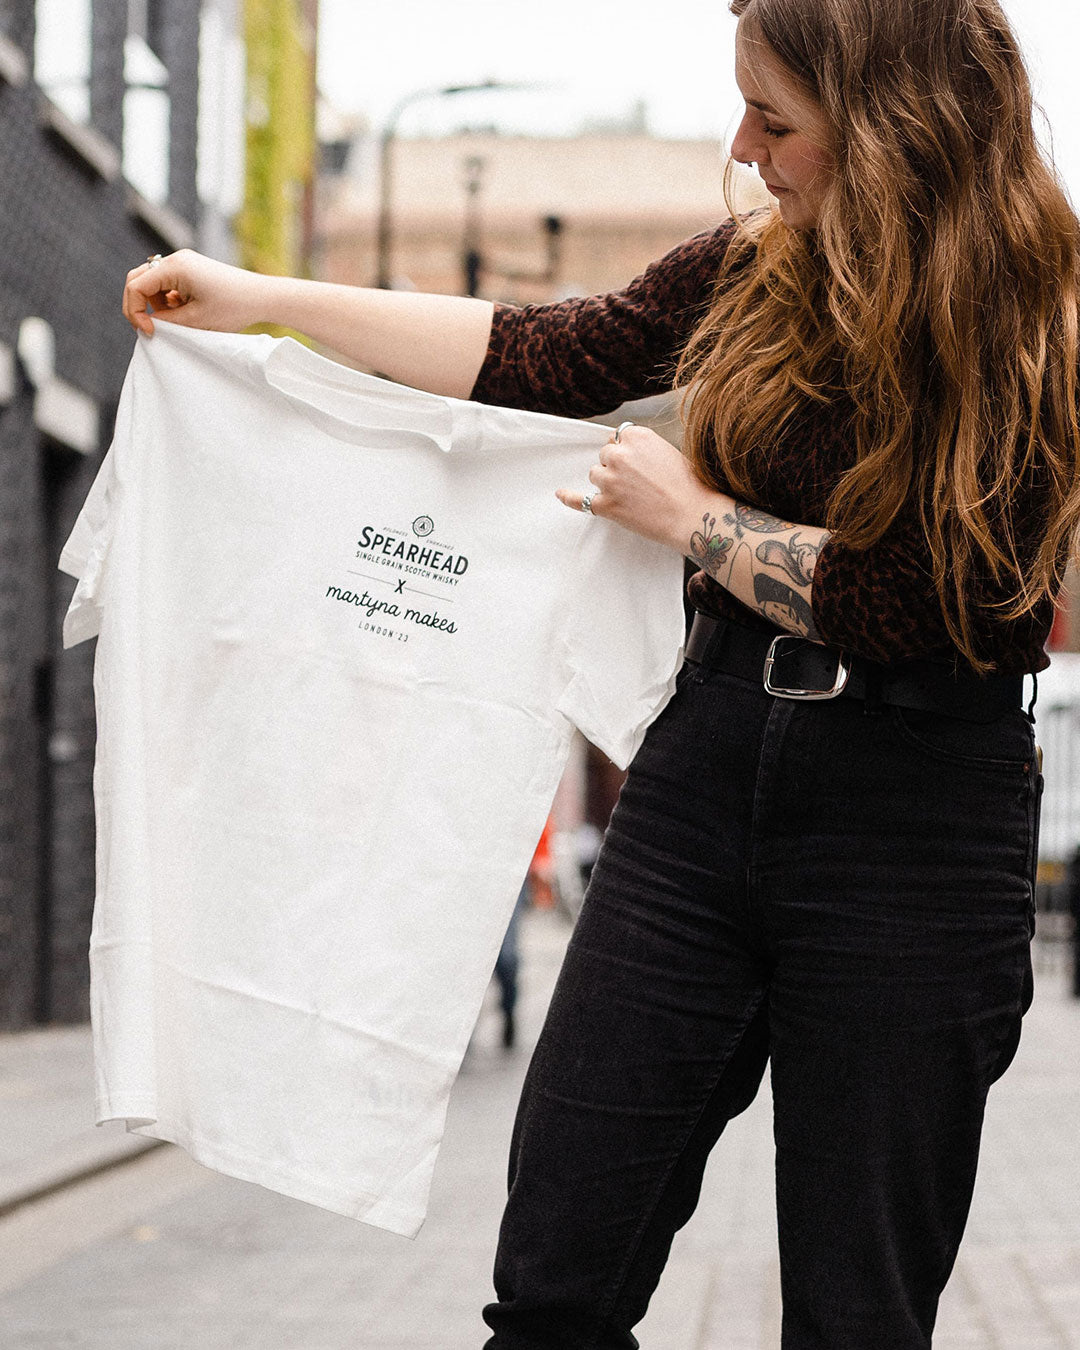 Martyna Makes Limited Edition T&amp;#8209;Shirt